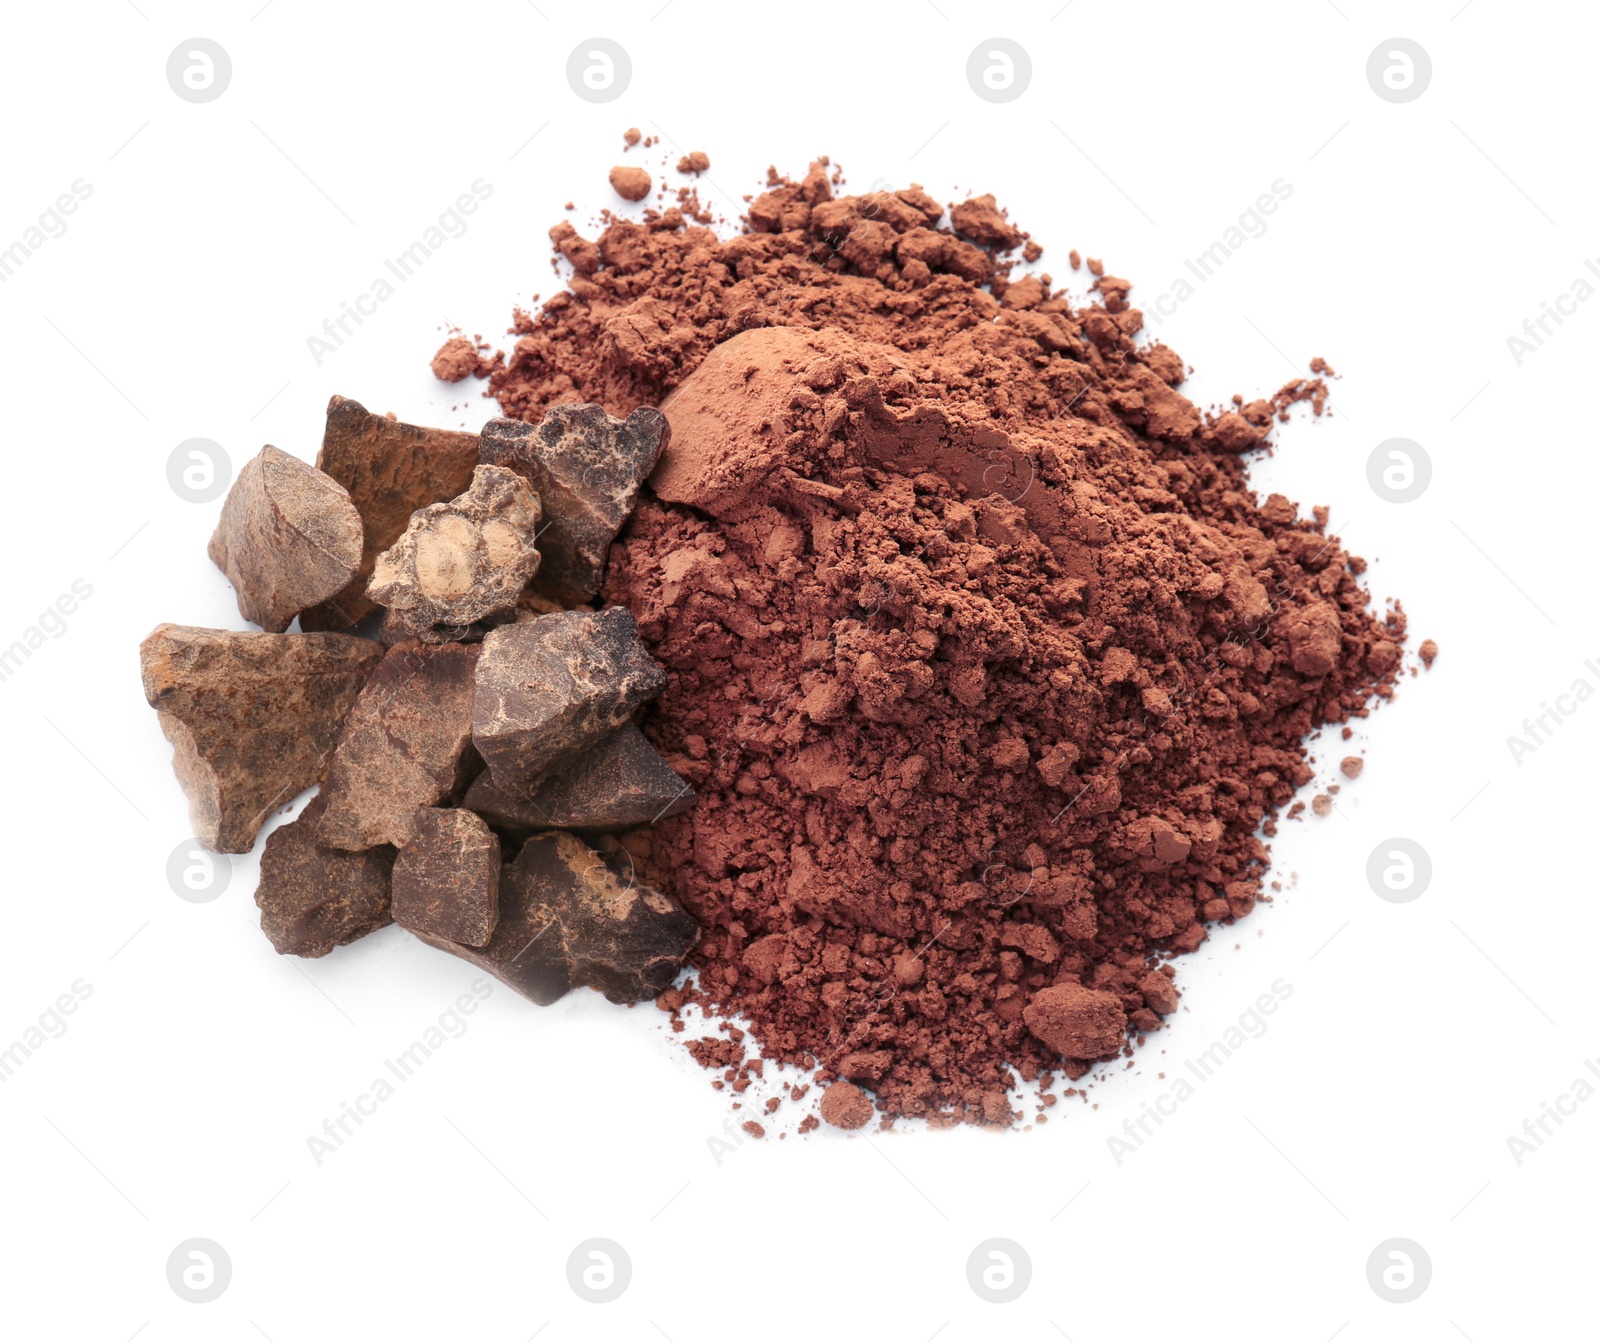 Photo of Cocoa powder and pieces of chocolate on white background